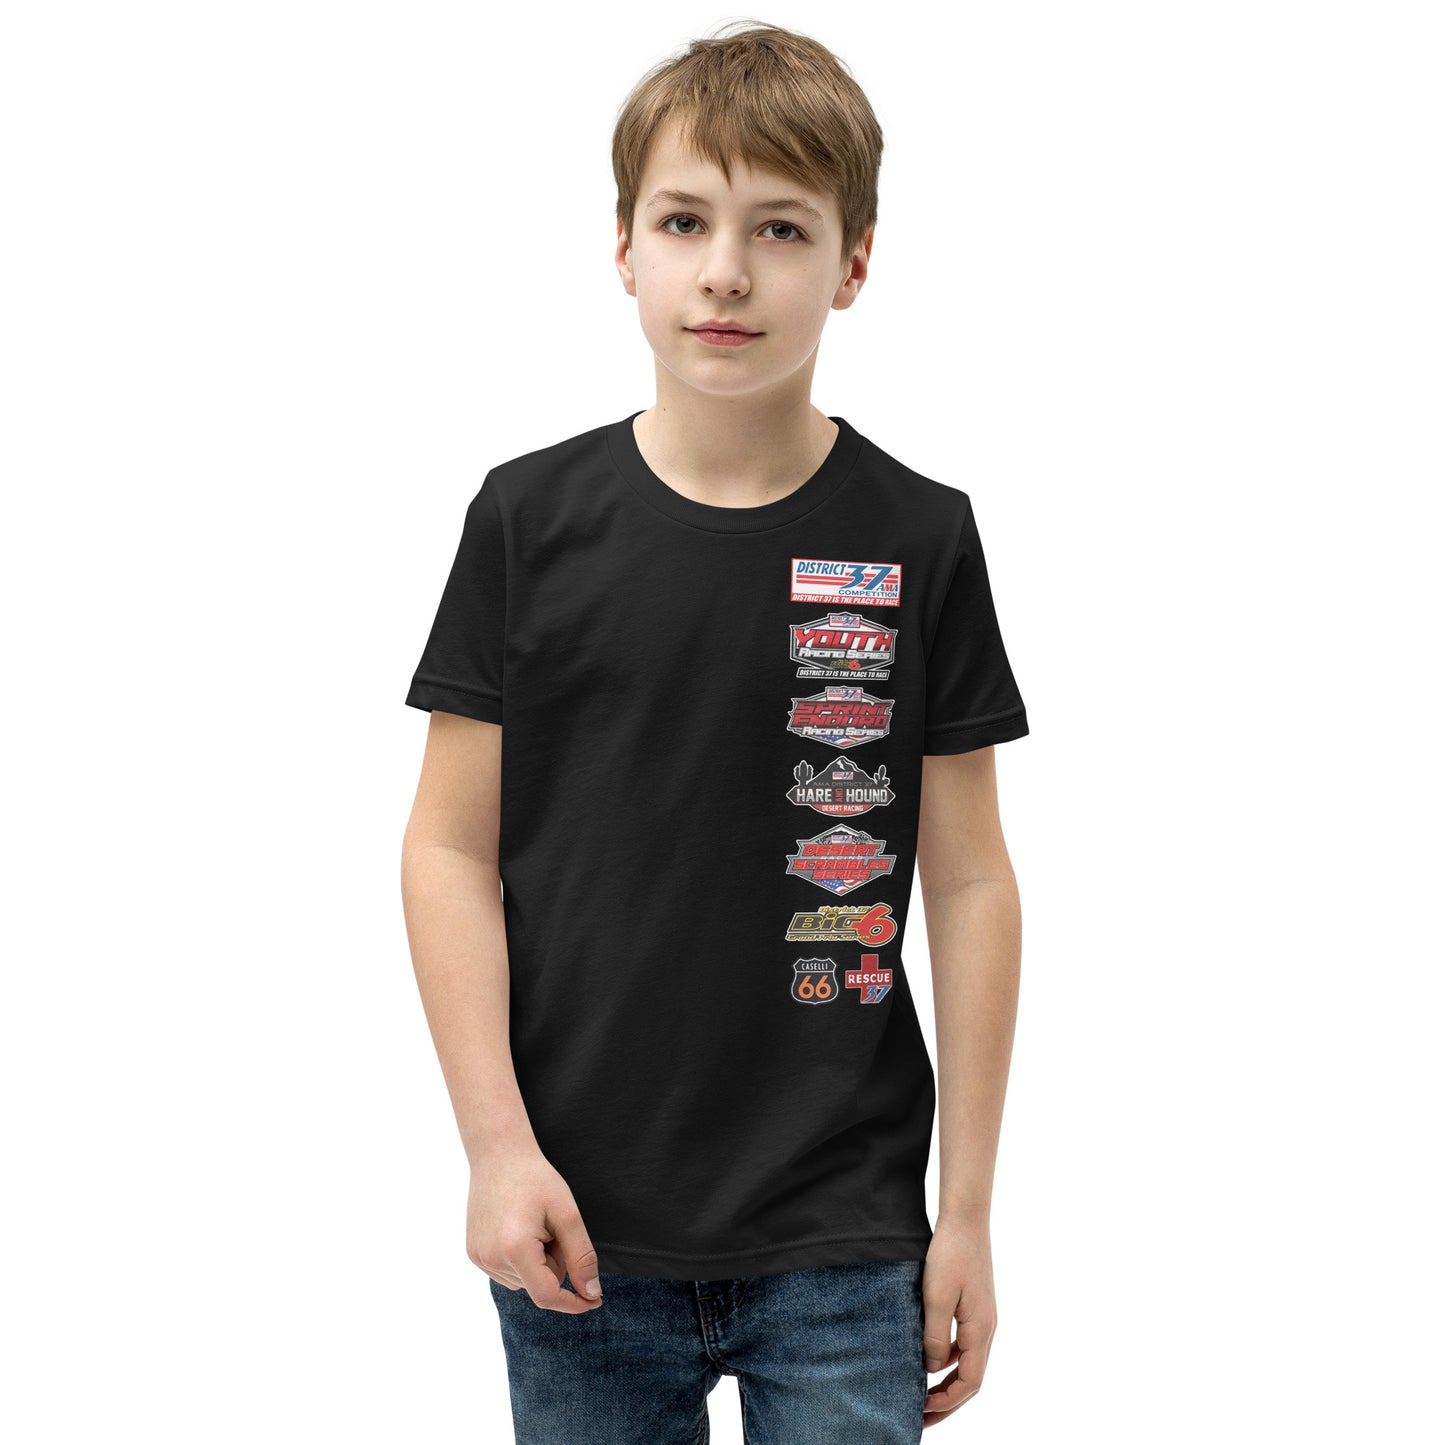 Youth District 37 Series Shirt - Youth D37 Shirt